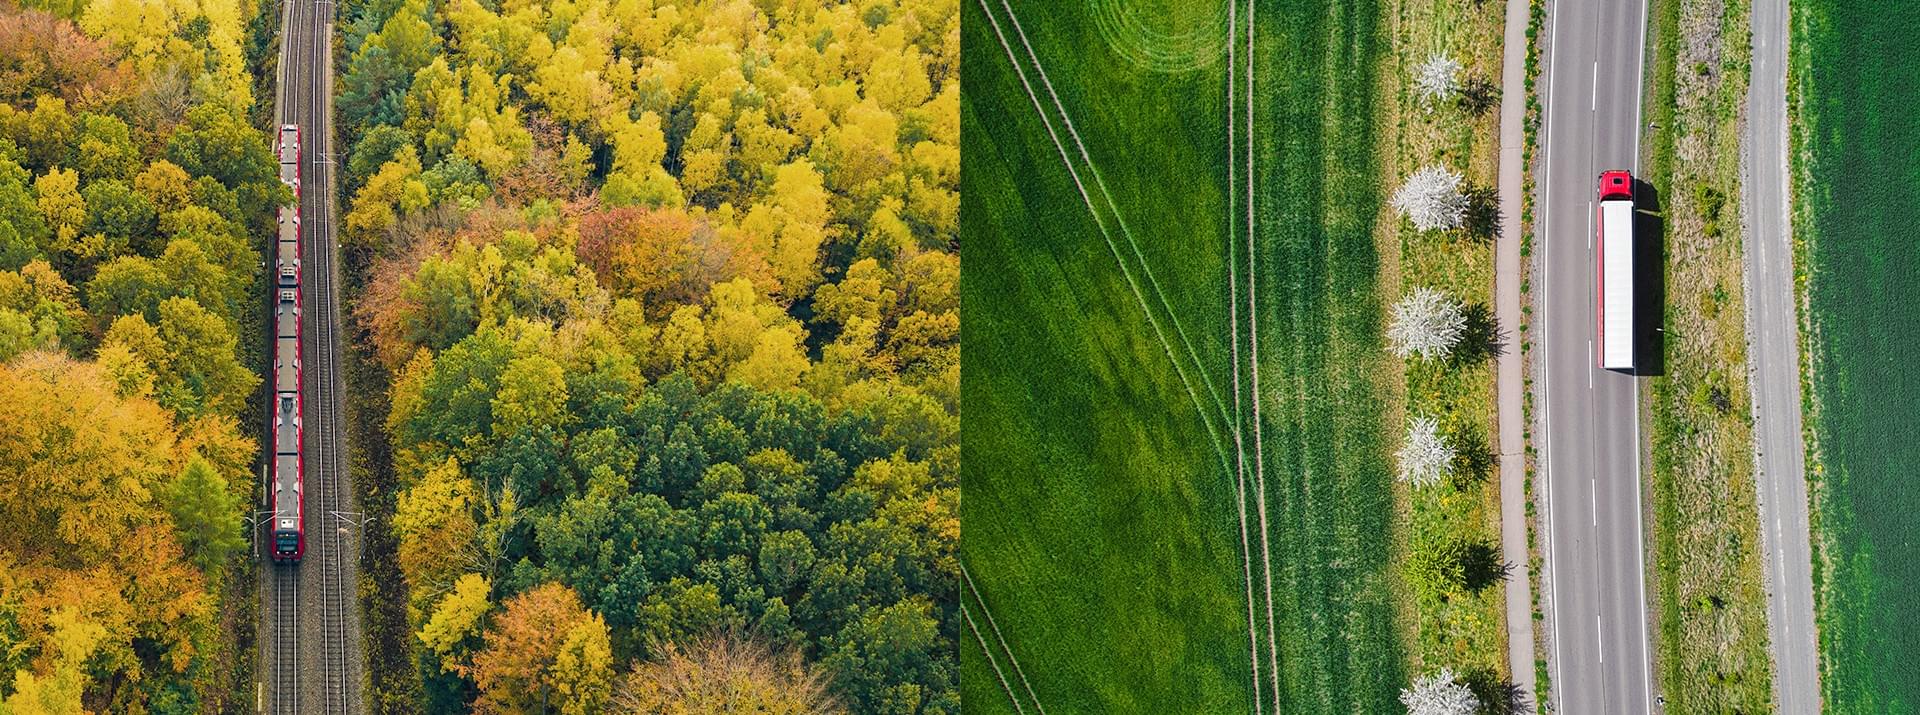 Photo collage of two pictures taken from a bird's eye view: On the left, a train drives through an autumn forest; on the right, a truck drives through green fields.